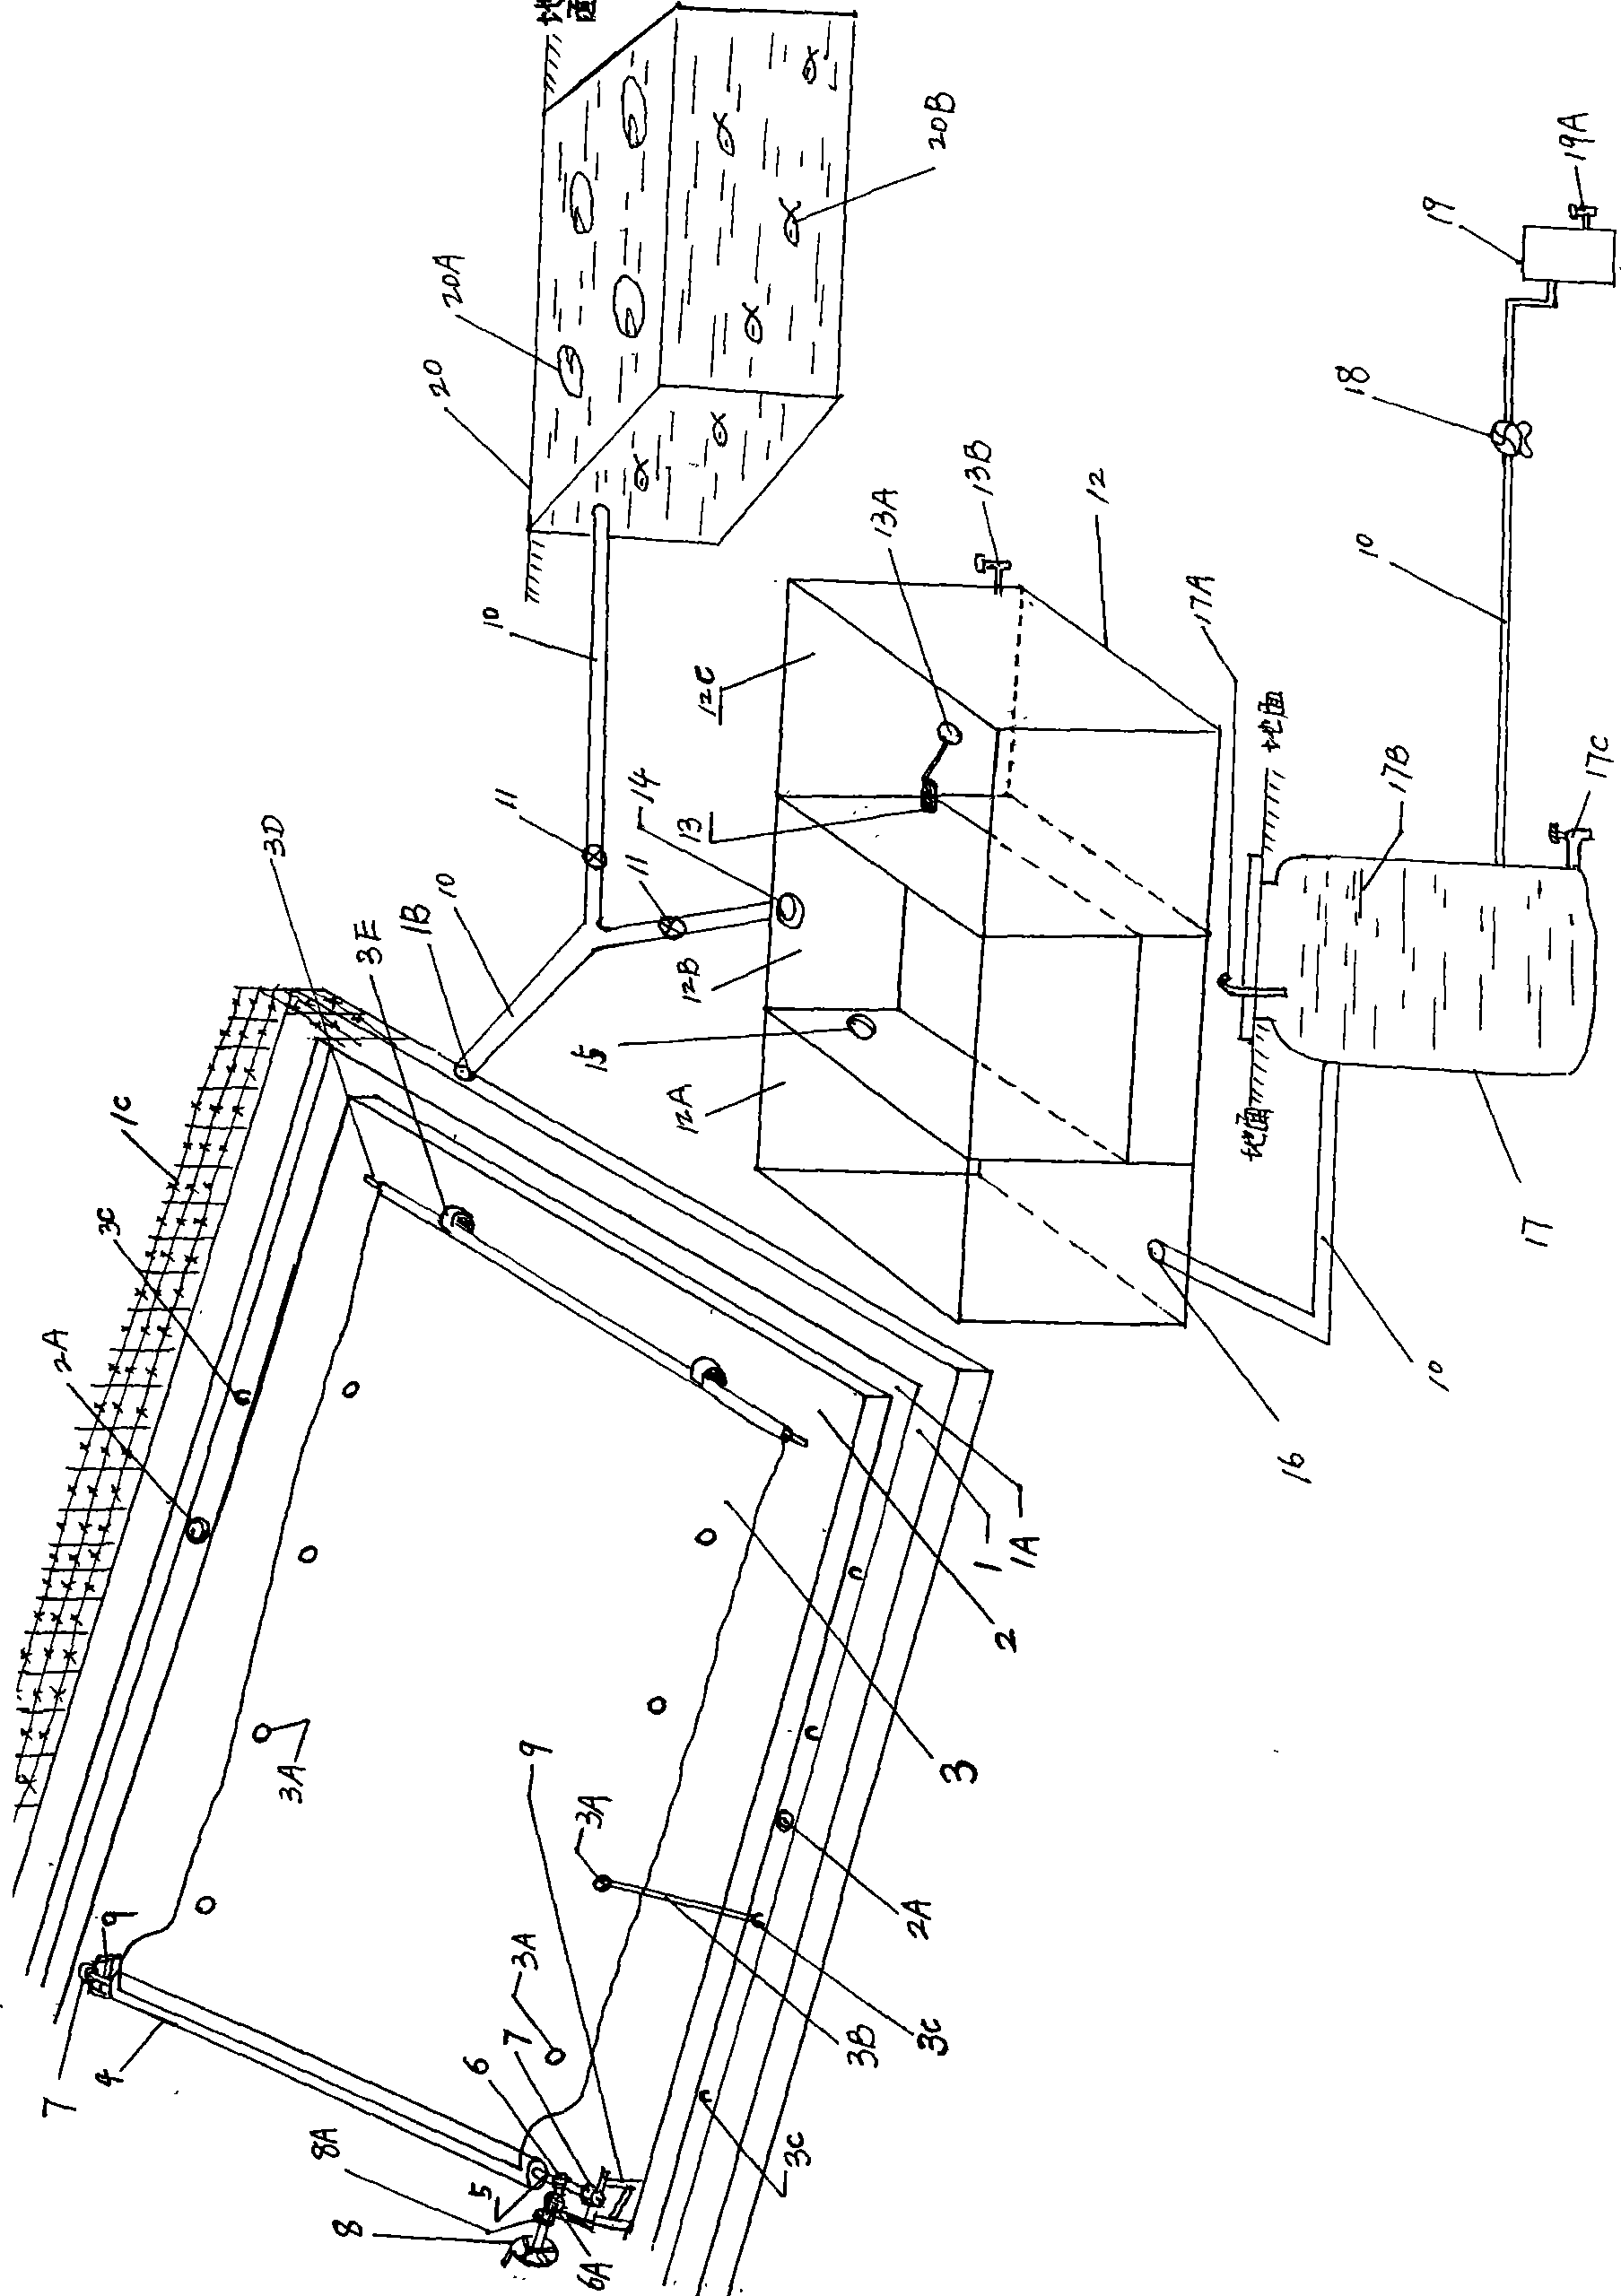 Clean rainwater collection and purification apparatus